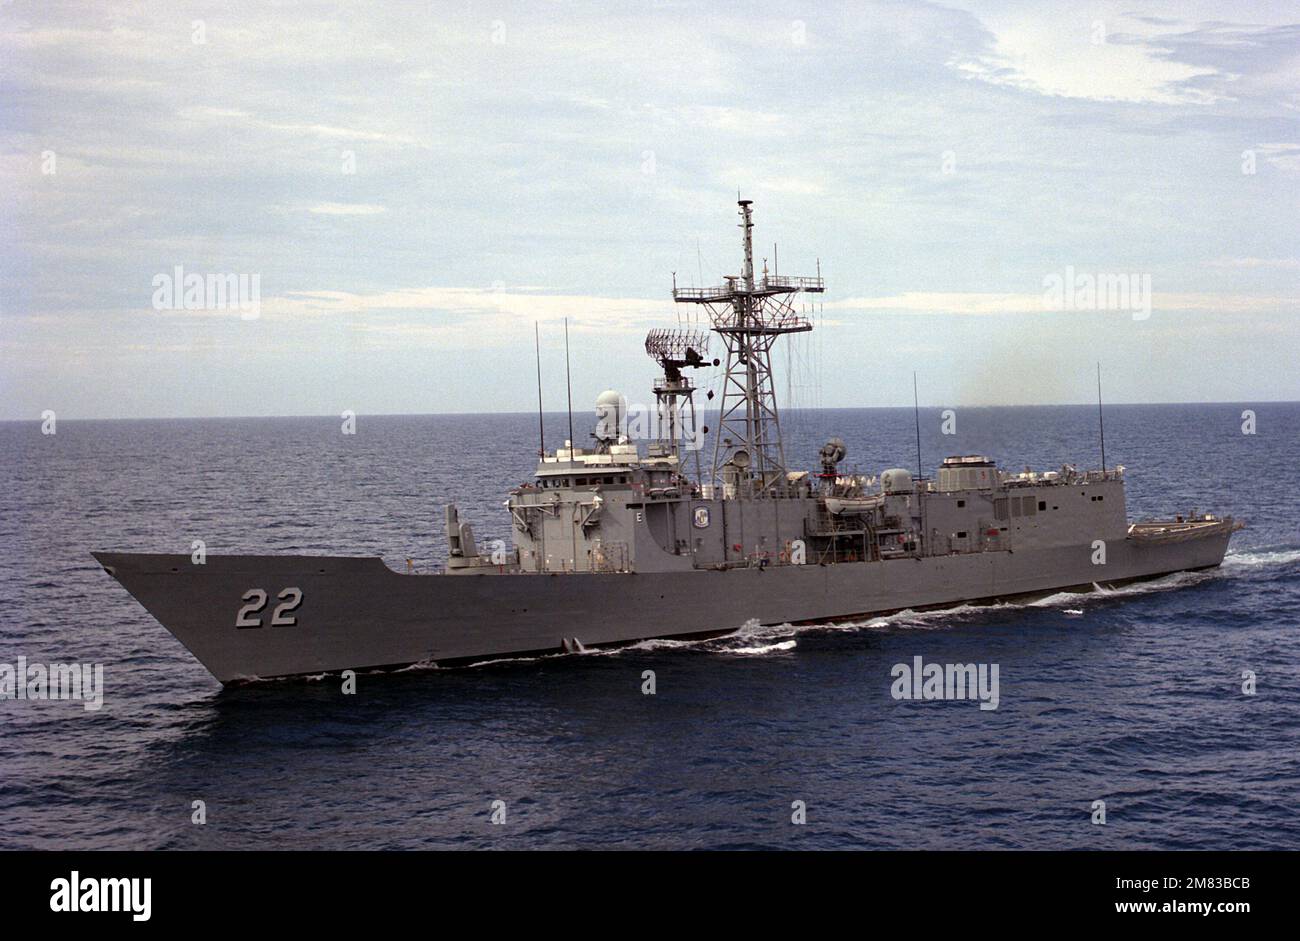 A port bow view of the guided missile frigate USS FAHRION (FFG-22 ...